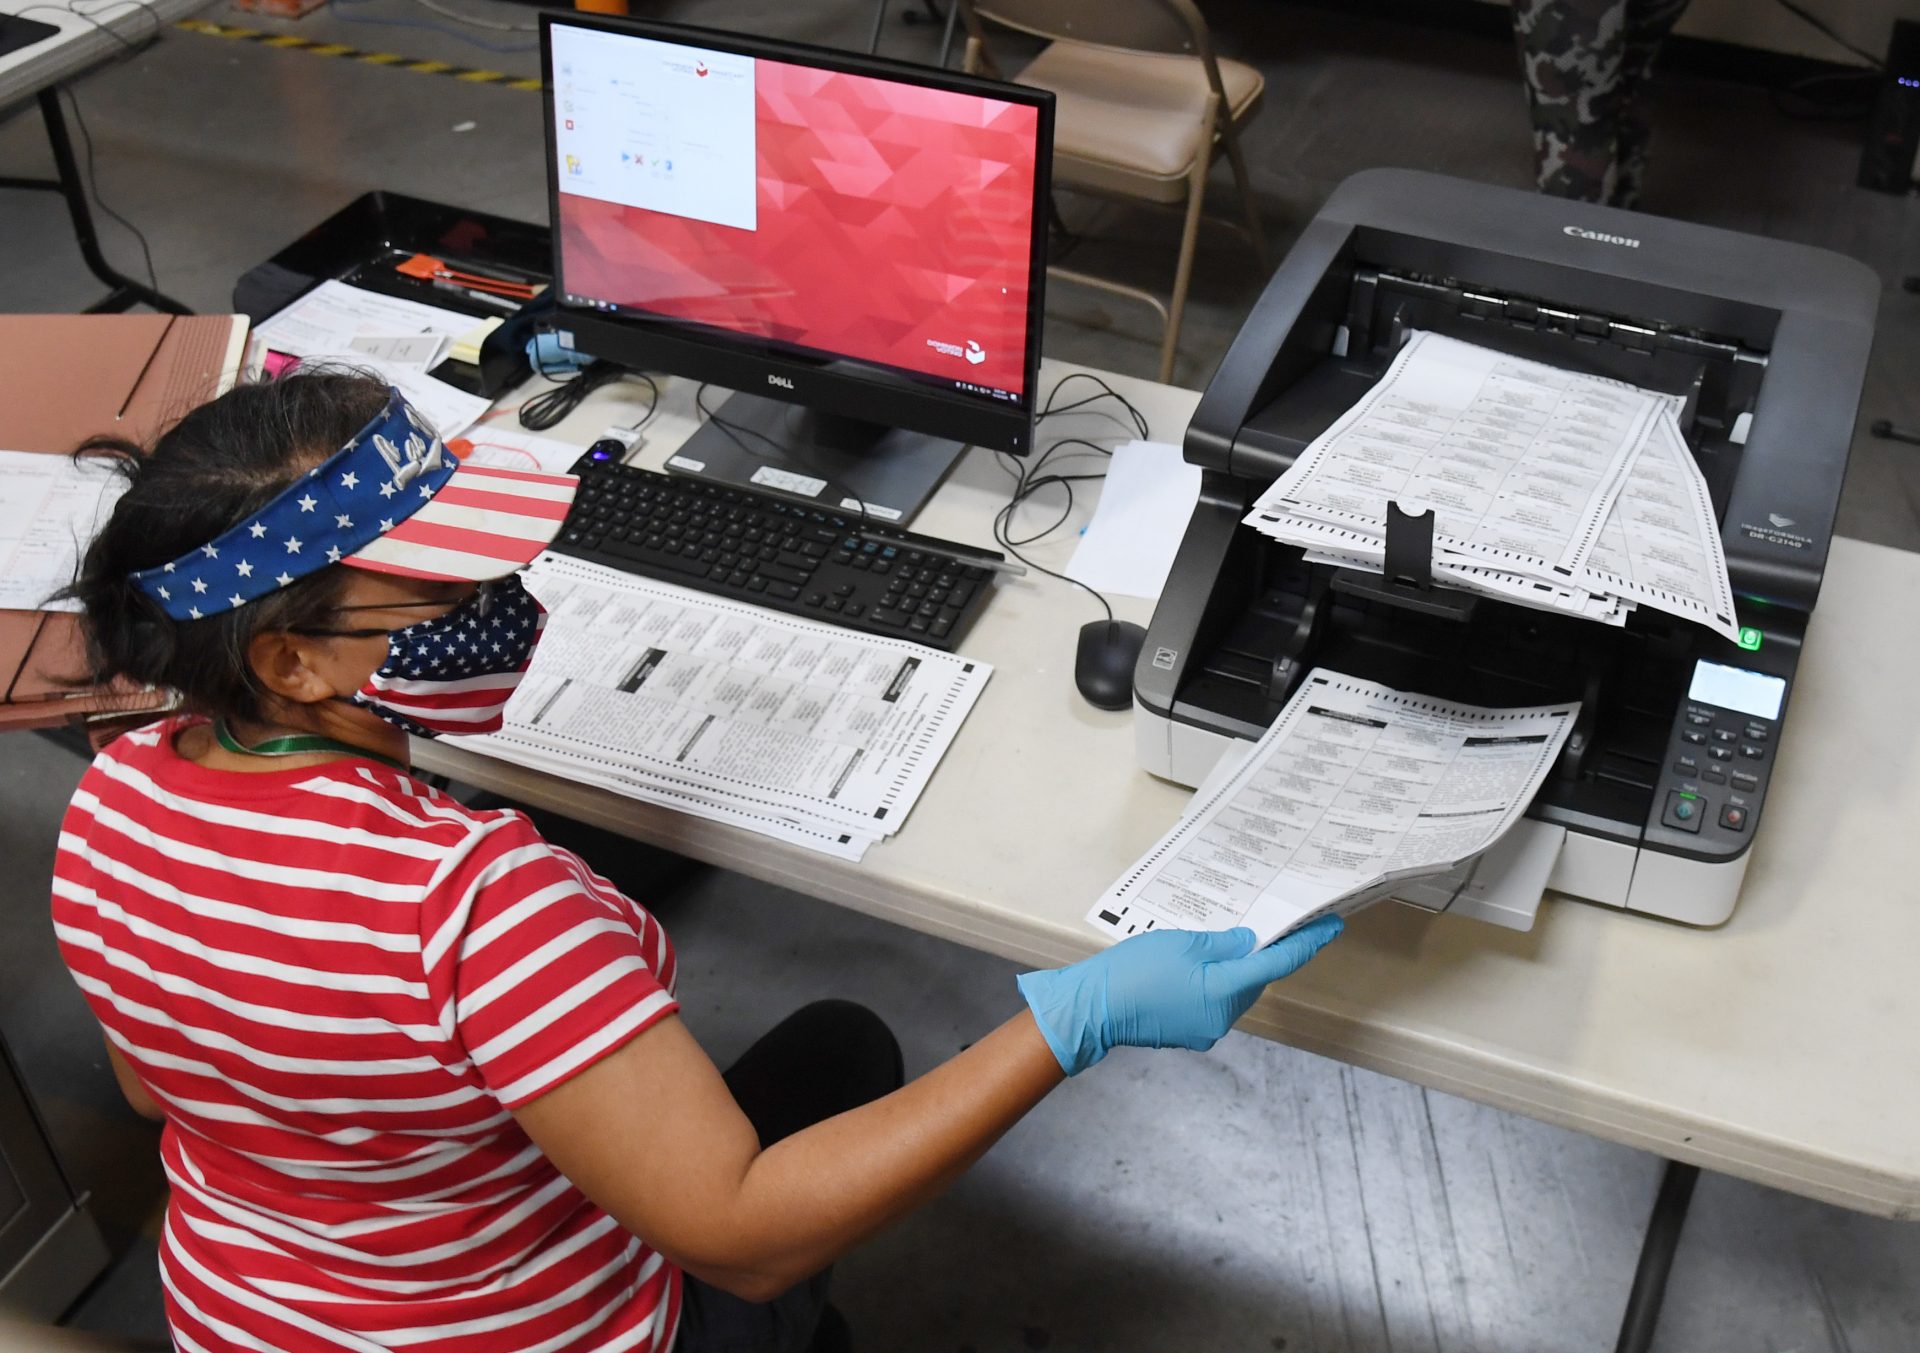 A Clark County, Nev. election worker scans mail-in ballots on October 20, 2020 in North Las Vegas. Nevada allows officials to count ballots received in advance of Election Day in order to speed the tabulation of results that evening.